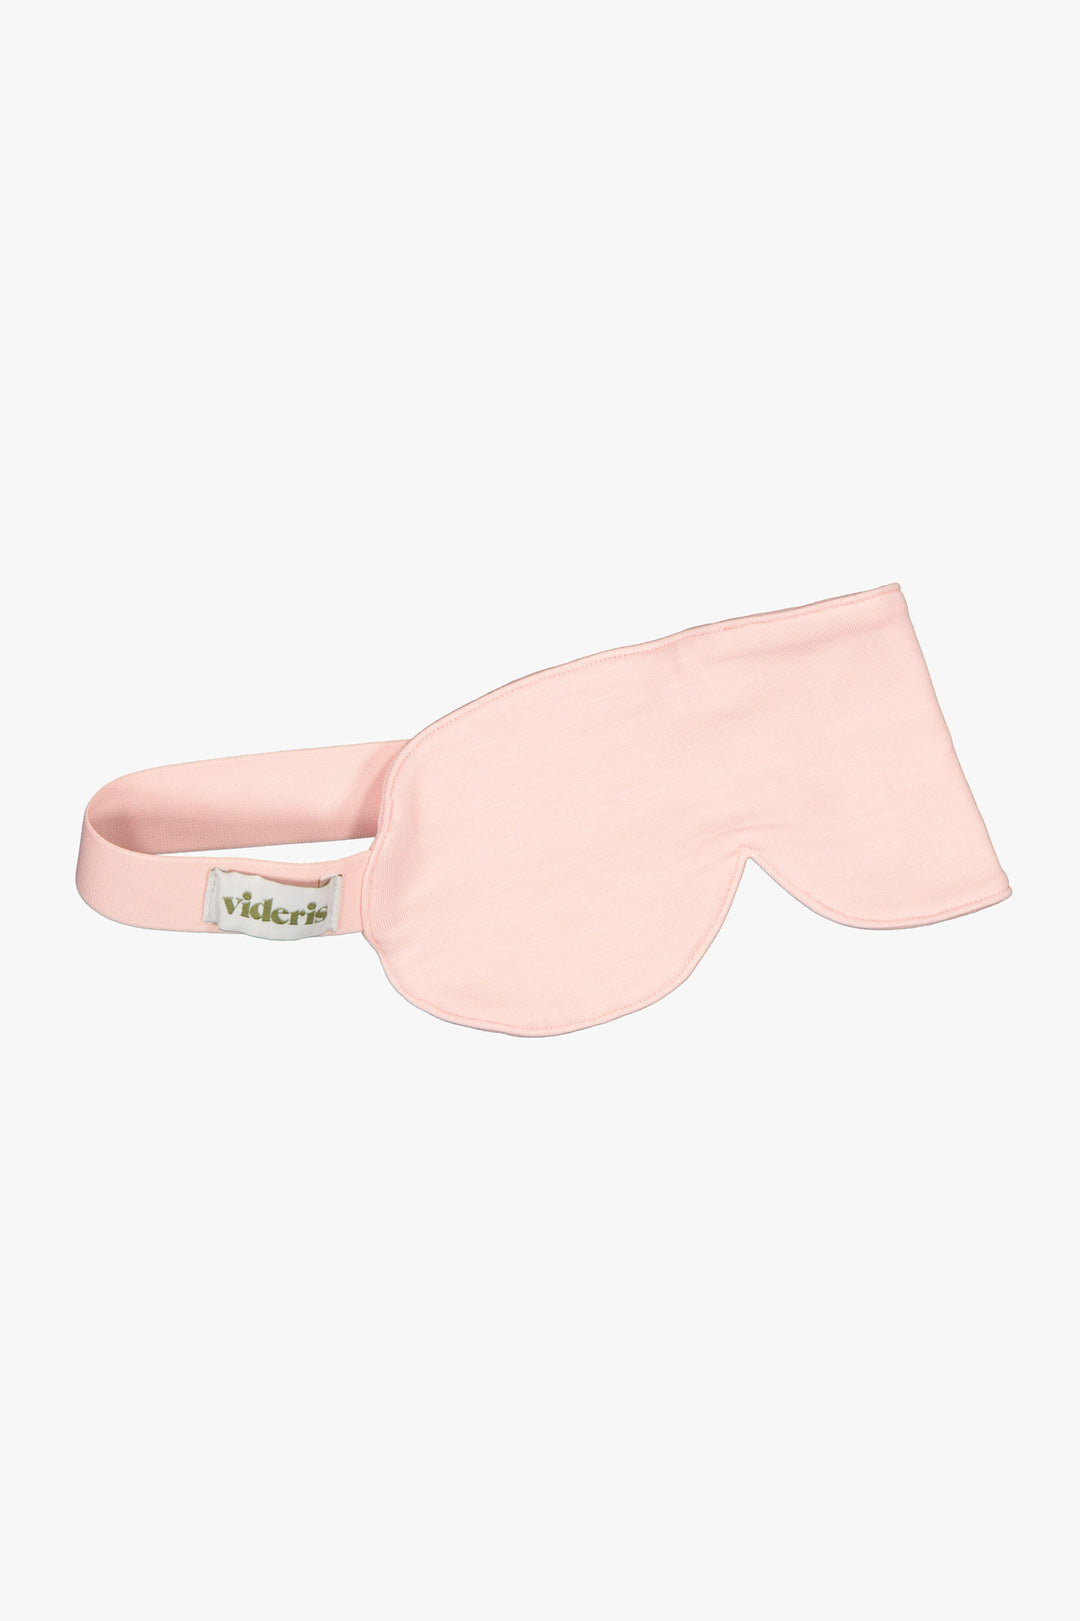 Videris Lingerie sleep mask in rosy pink TENCEL™ with soft wide elastic band in rosy pink